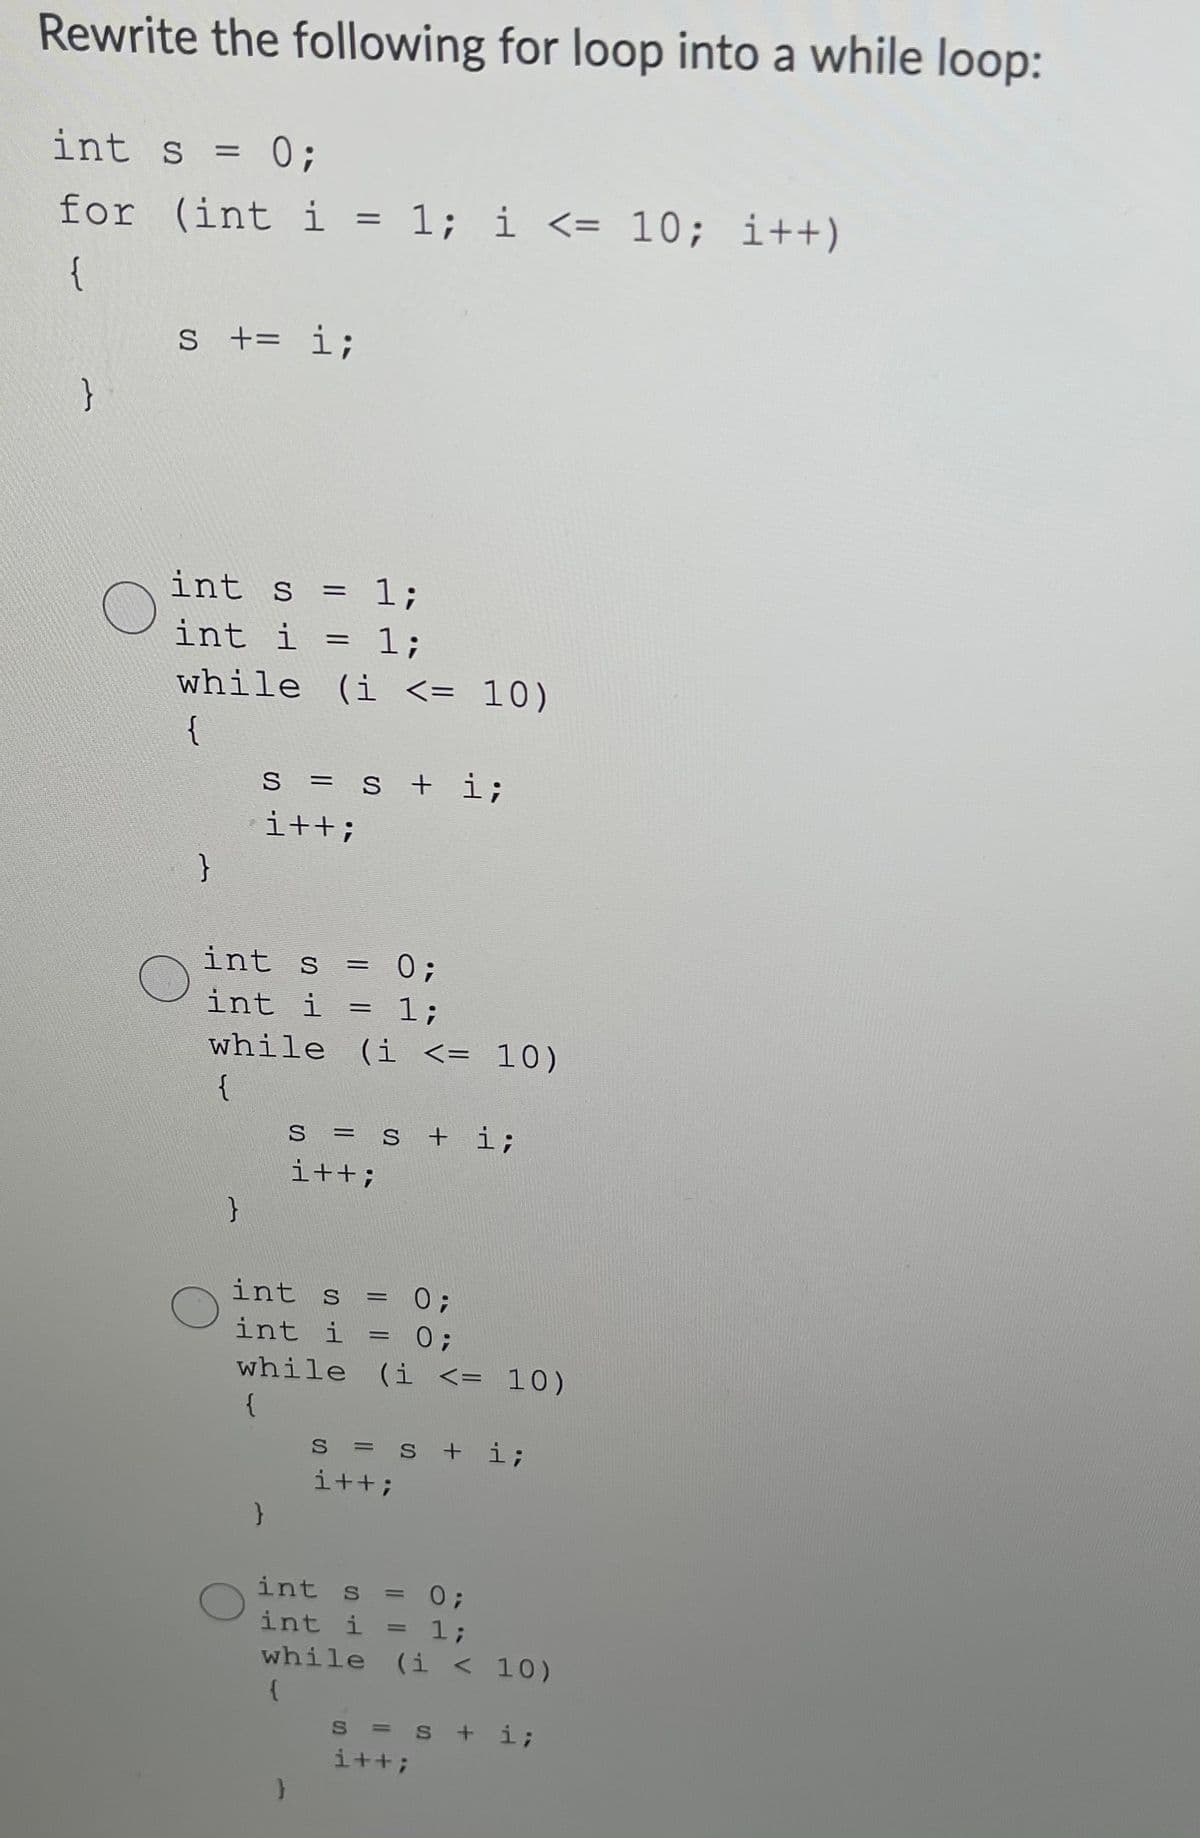 Rewrite the following for loop into a while loop:
int s = 0;
for (int i = 1; i <= 10; i++)
{
s += i;
}
int s = 1;
int i = 1;
while (i <= 10)
{
s = s + i;
i++;
int s = 0;
int i = 1;
while (i <= 10)
{
S
s +i;
i++;
int s
0;
int i = 0;
while (i <= 10)
{
s = s + i;
i++;
%3D
int s = 0;
%3D
int i = 1;
while (i < 10)
S = s + i;
i++;
